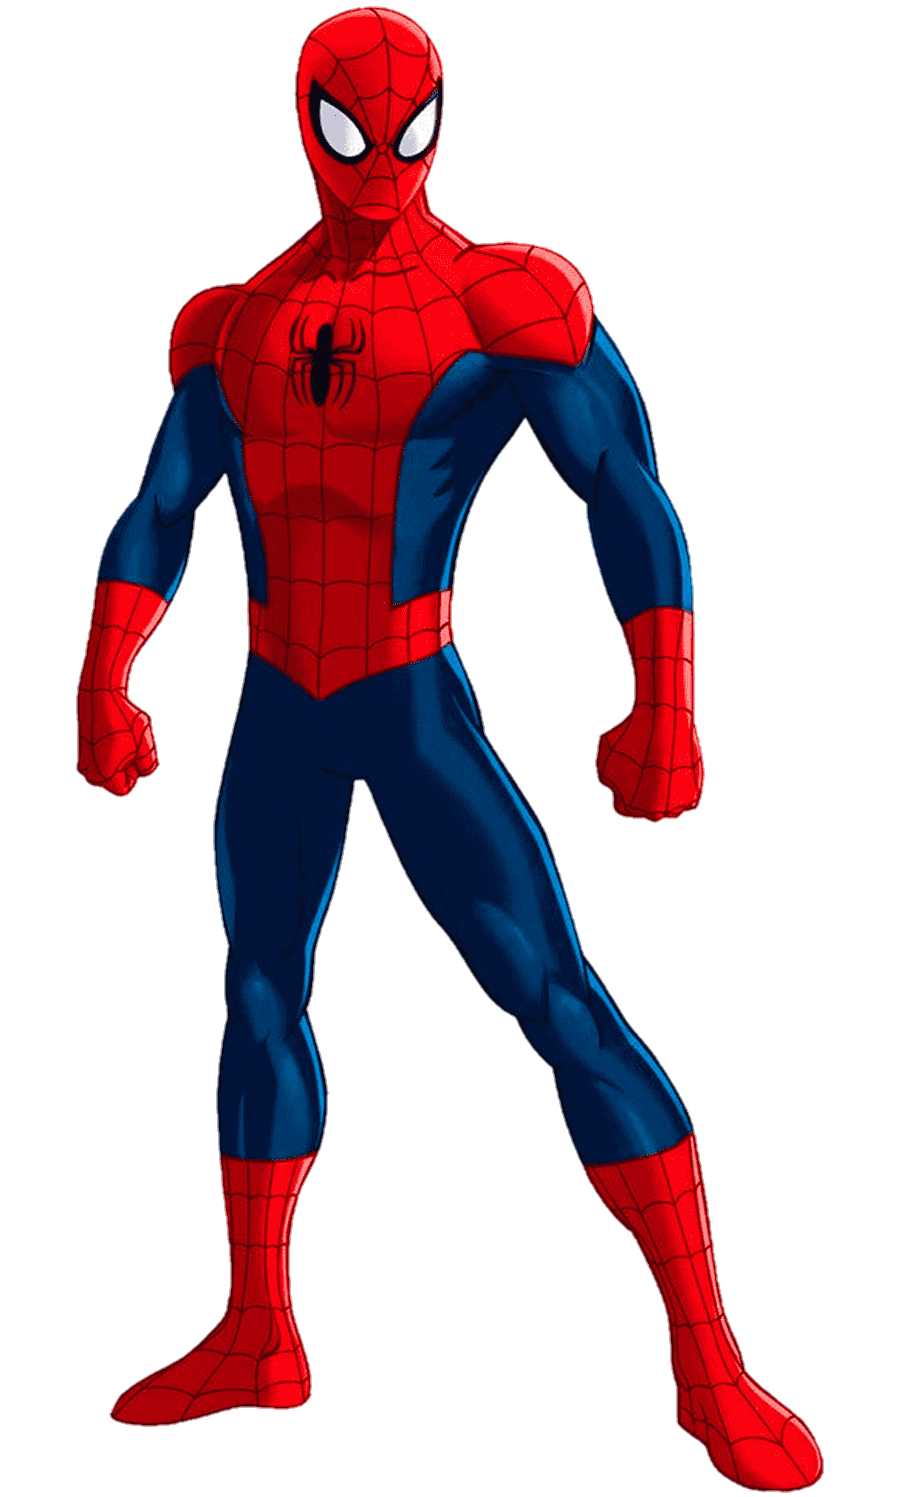 spider-man-pngfre-36